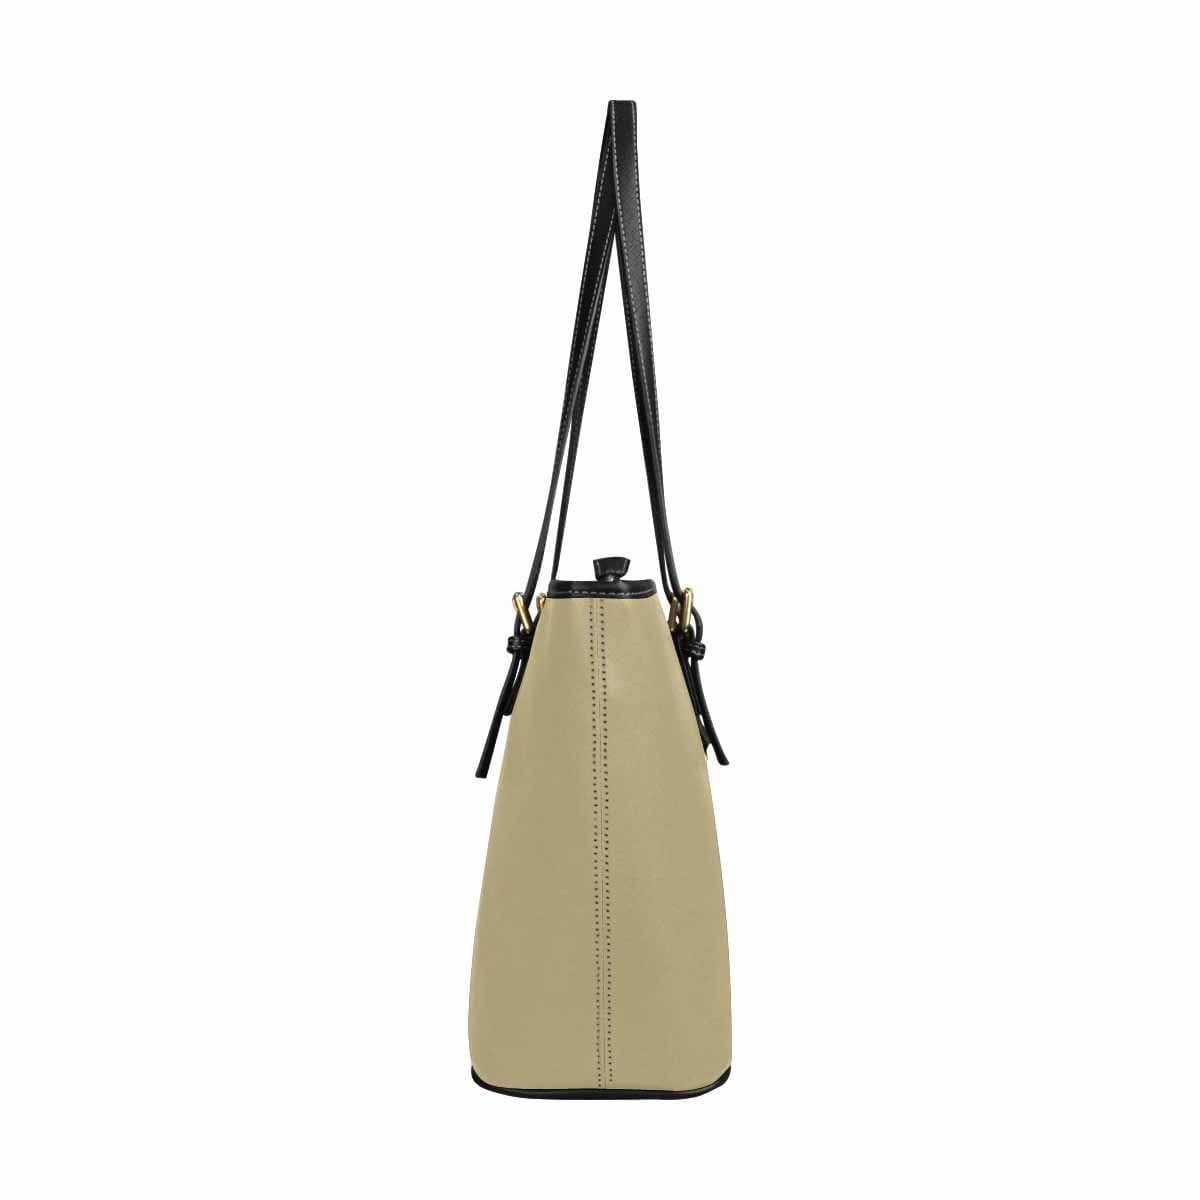 Large Leather Tote Shoulder Bag - Sand Dollar Brown - Bags | Leather Tote Bags